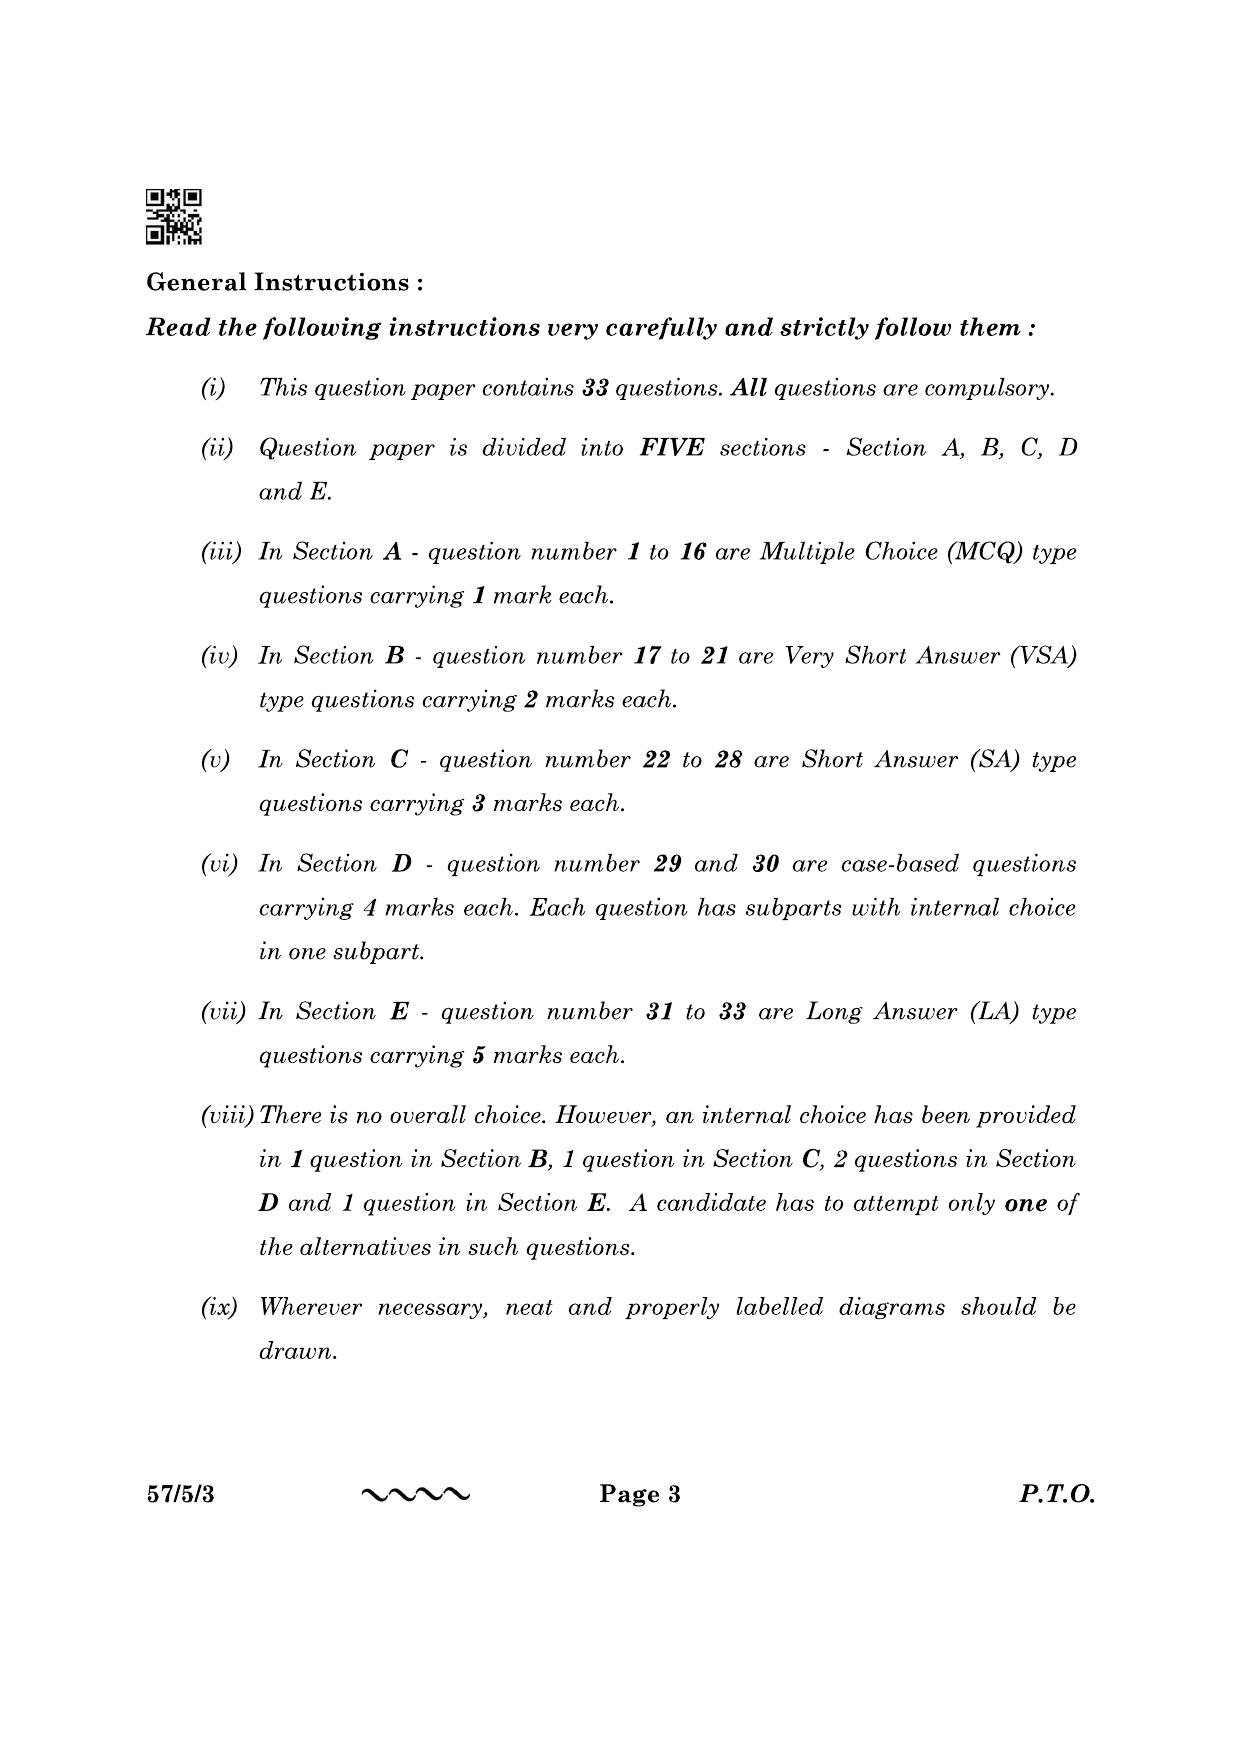 CBSE Class 12 57-5-3 Biology 2023 Question Paper - Page 3